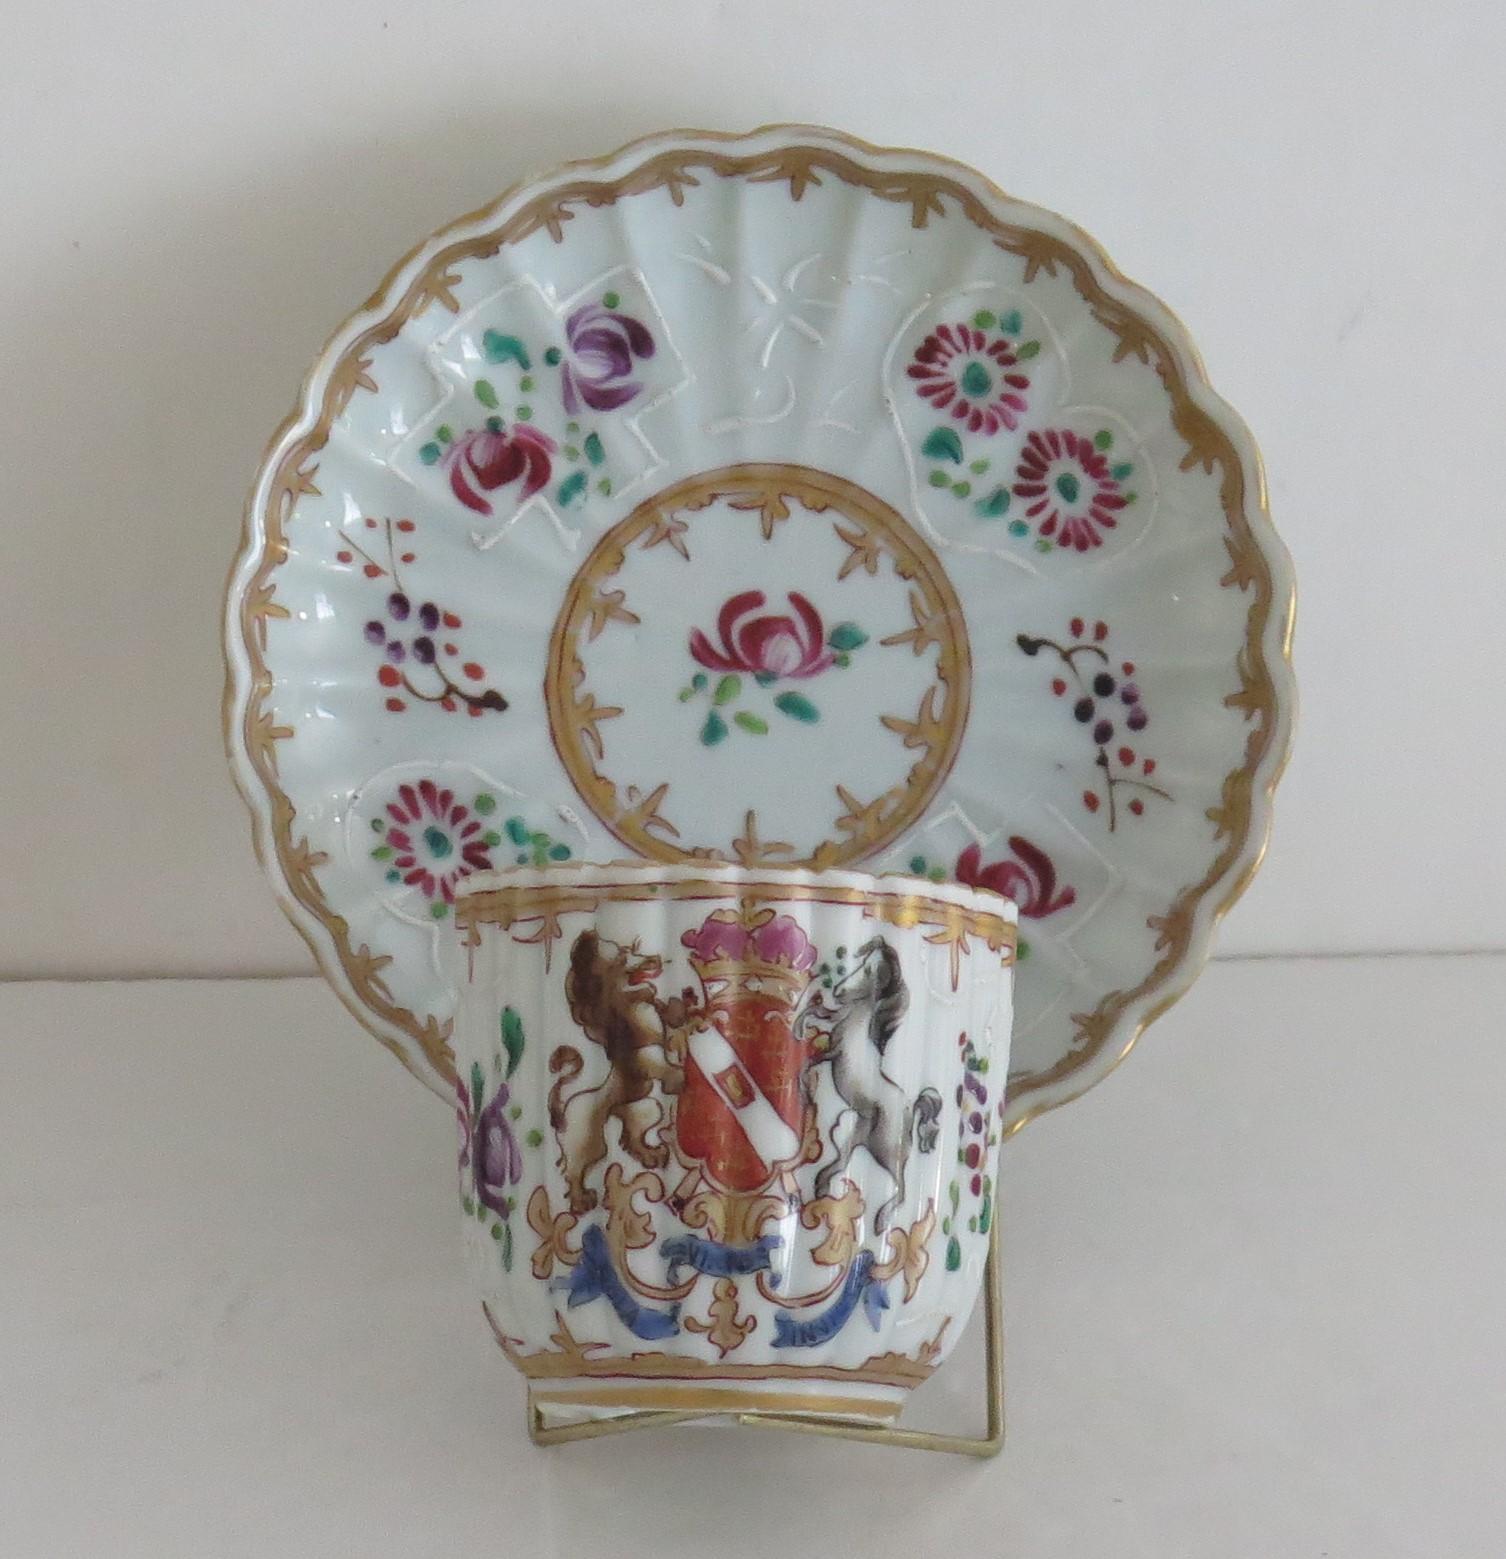 This is a very good fluted porcelain armorial tea cup and saucer in the Chinese taste with an Armorial lion and horse supporting a shield above a legend, made by Samson, Paris, France. 

 Edme Samson, Paris, circa 1860 - 1880. EdmeSamson of Paris